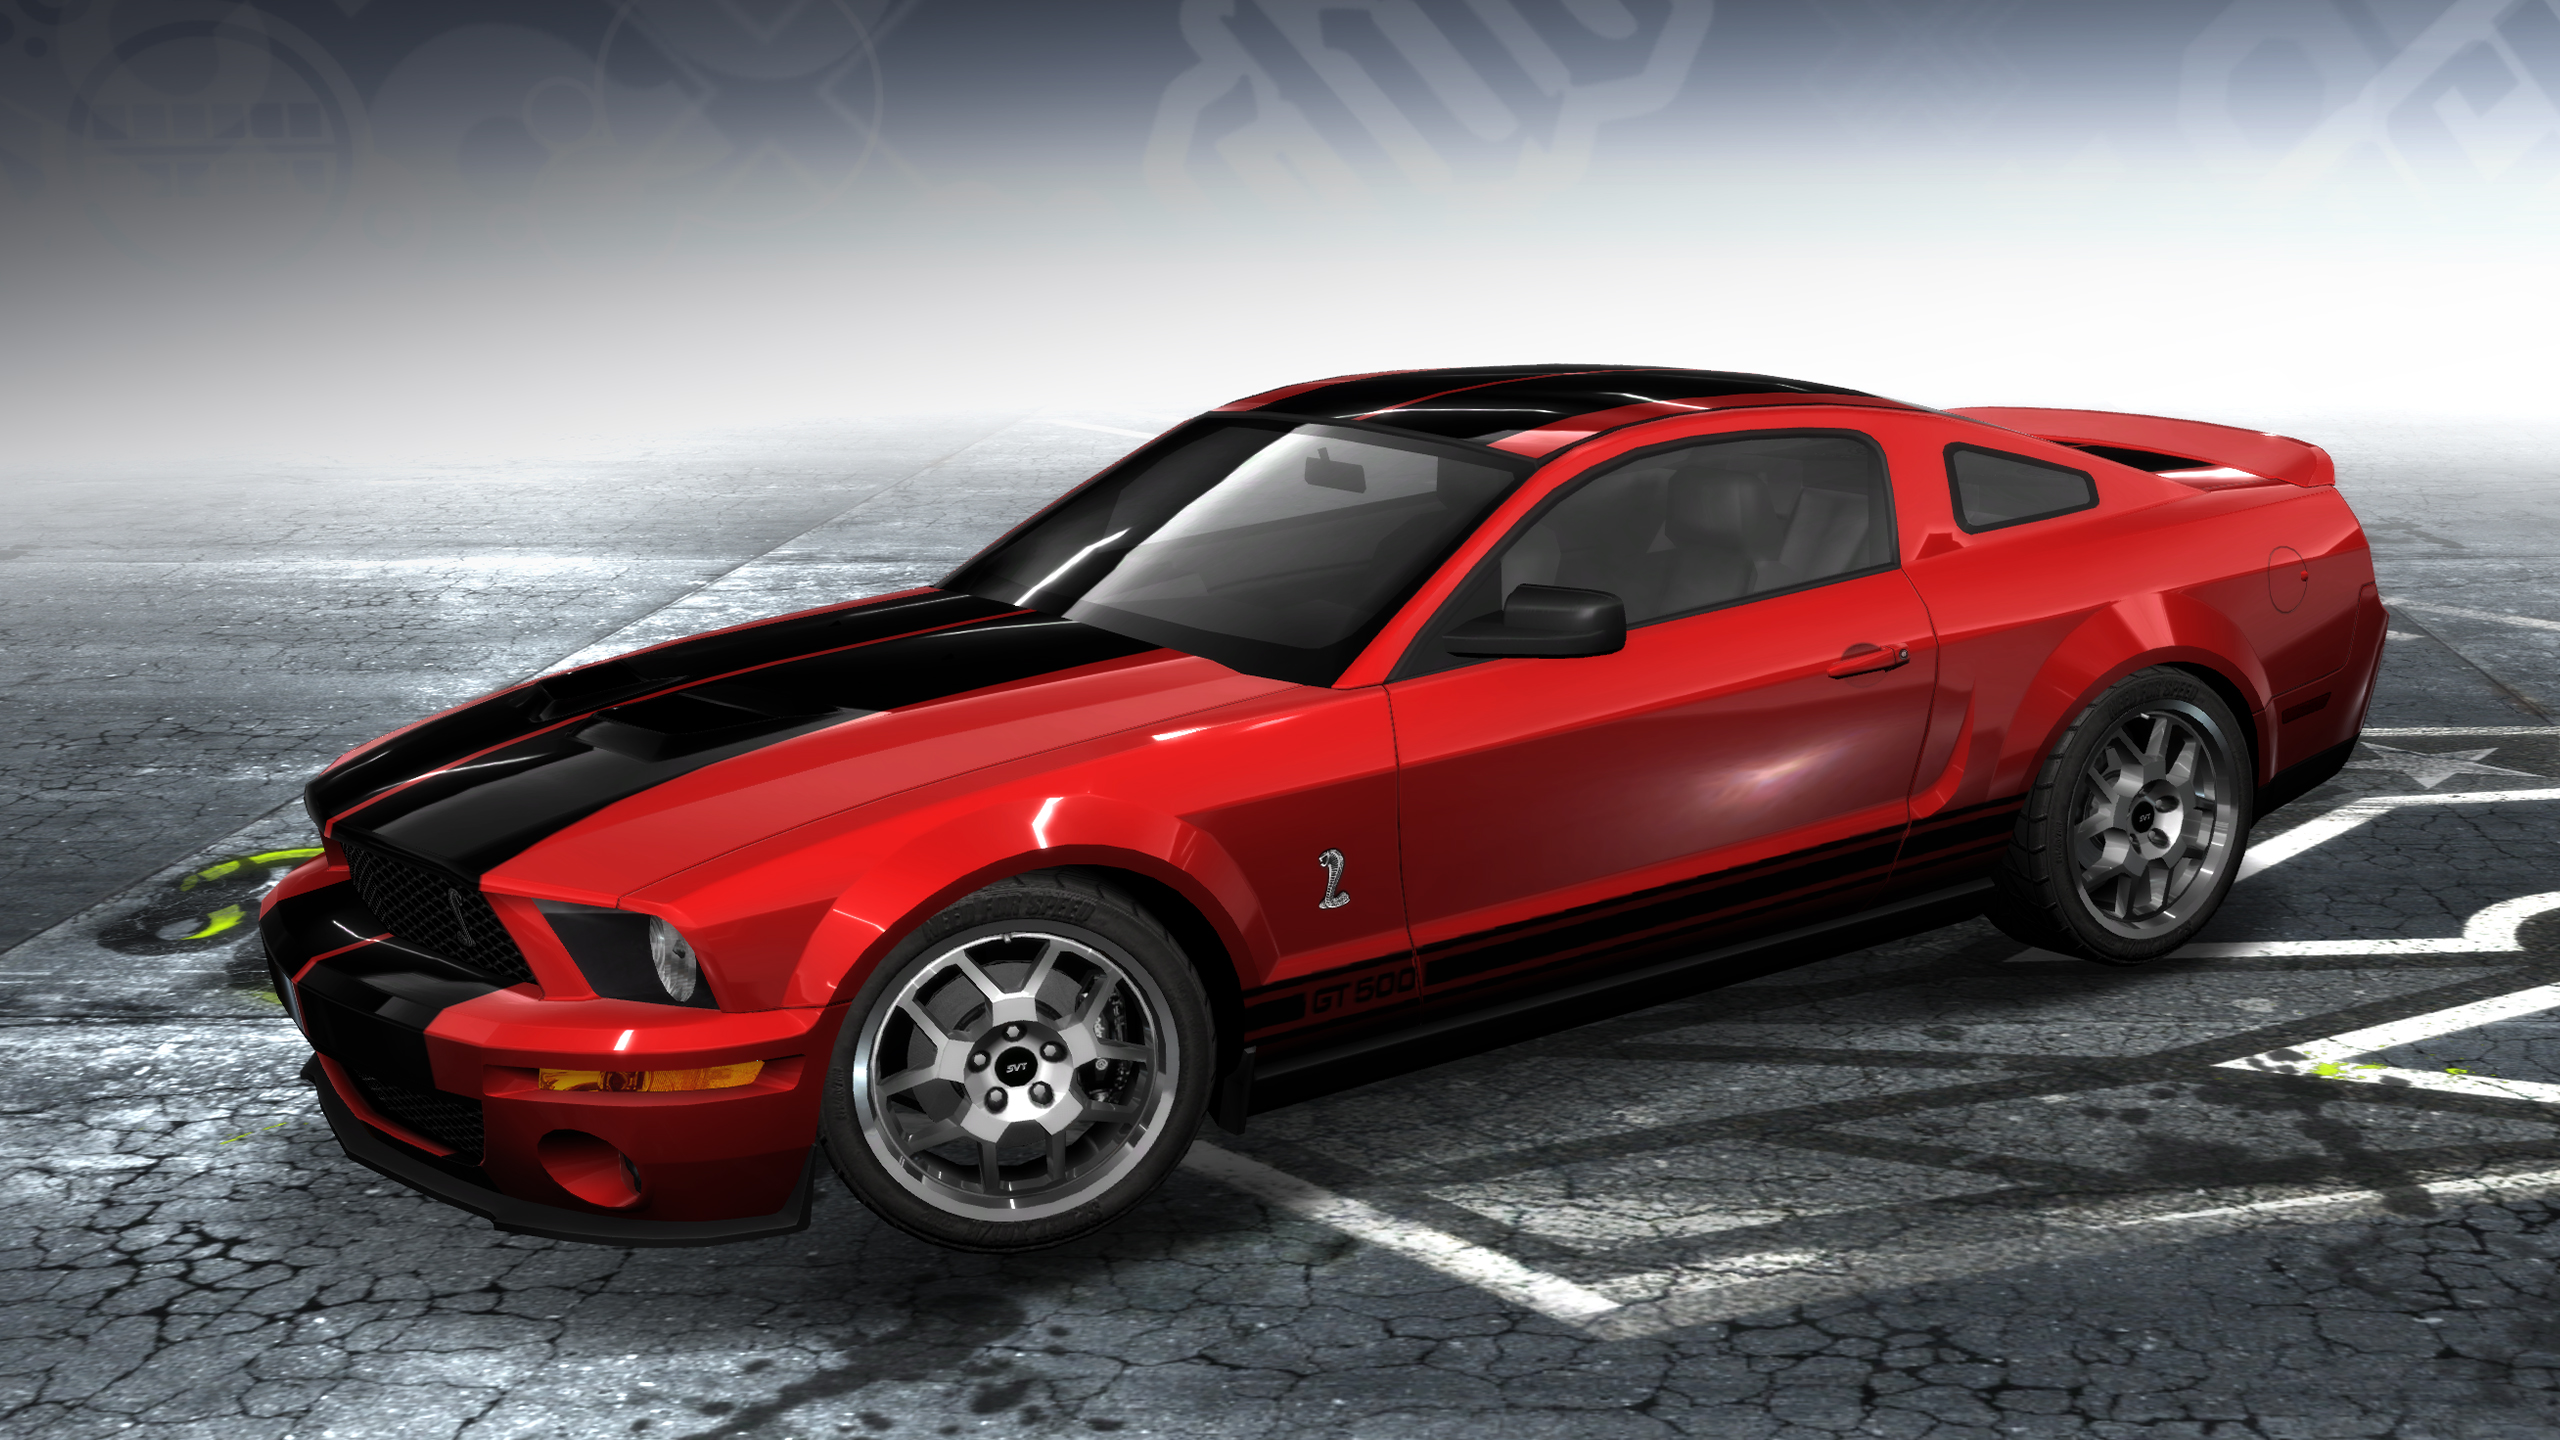 Ford Shelby GT500 (S-197 I), Need for Speed Wiki